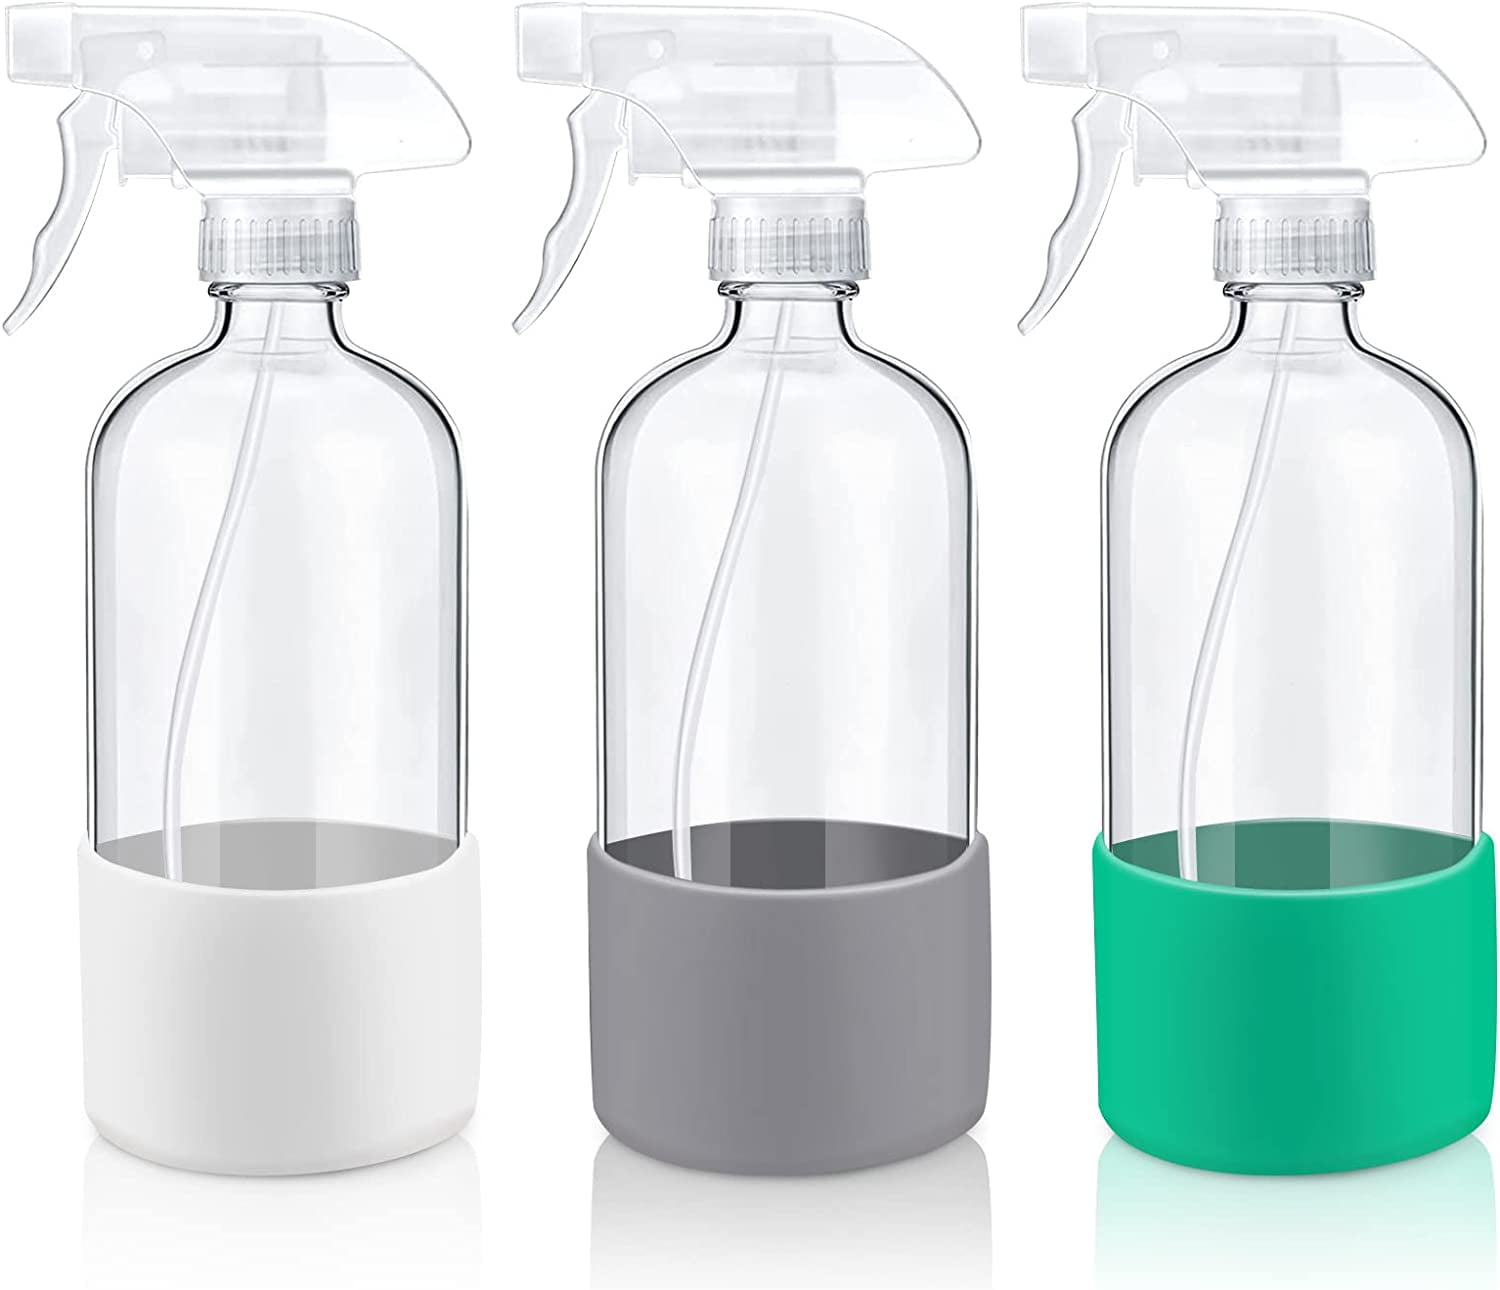 voorzetsel zout definitief 3 Pack Glass Spray Bottles with Silicone Sleeve Protection - Walmart.com